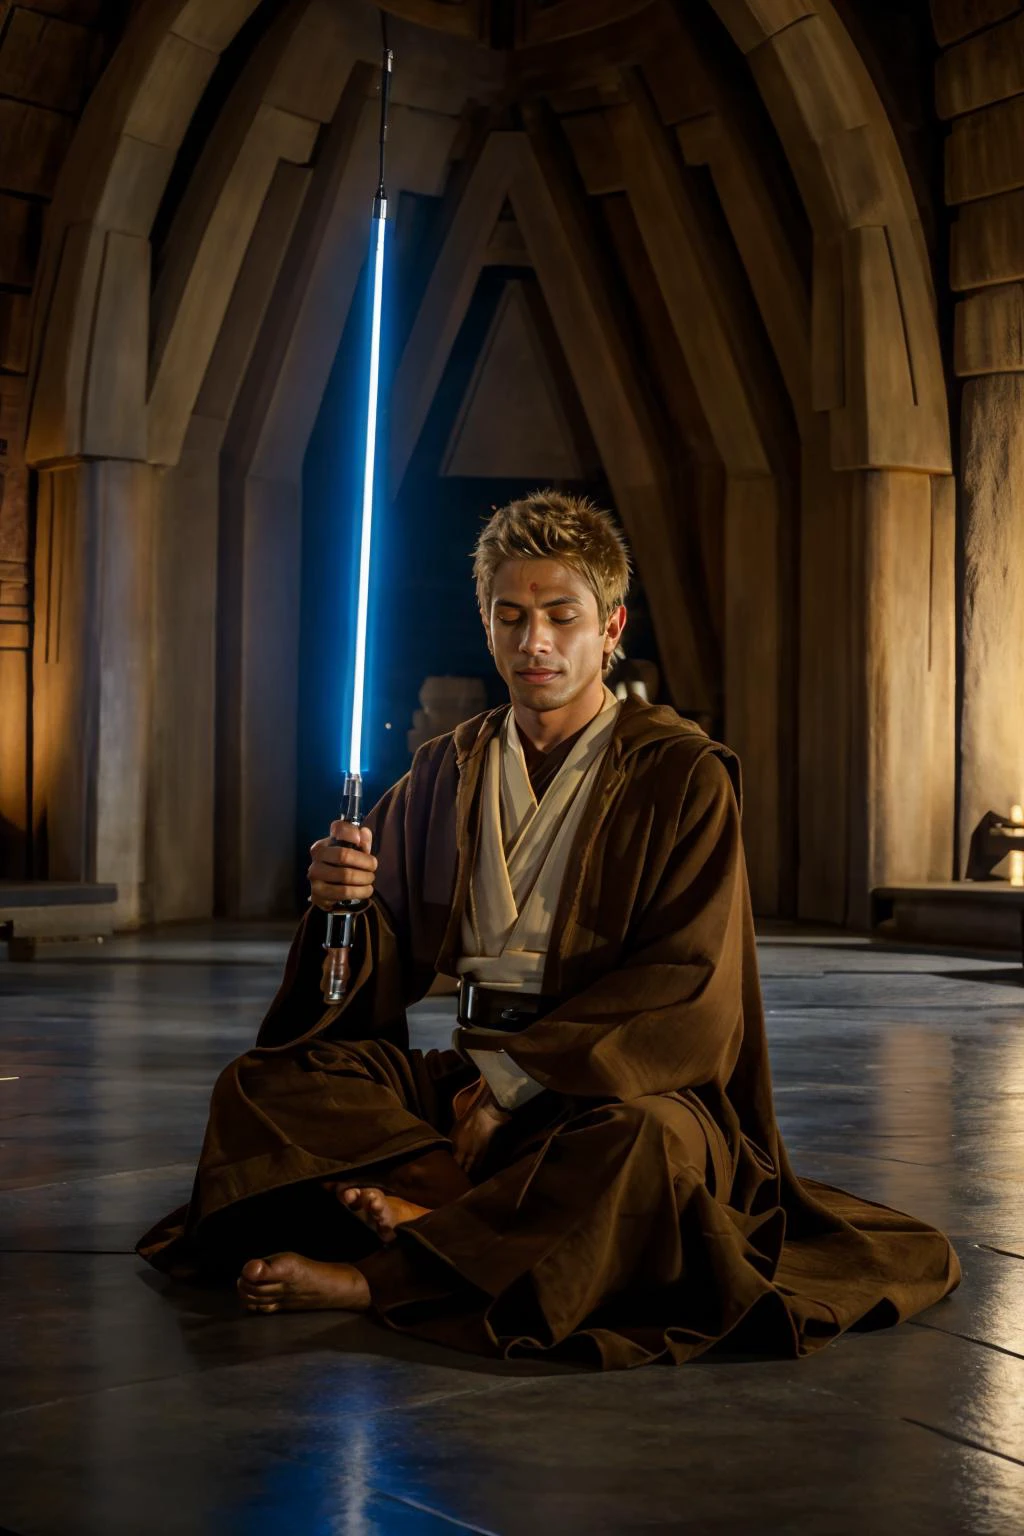 (Jedi temple), (sitting Indian style:1.5), JackHarrer  in jedioutfit, eyes closed, (meditating), (((full body portrait))), (wide angle) 